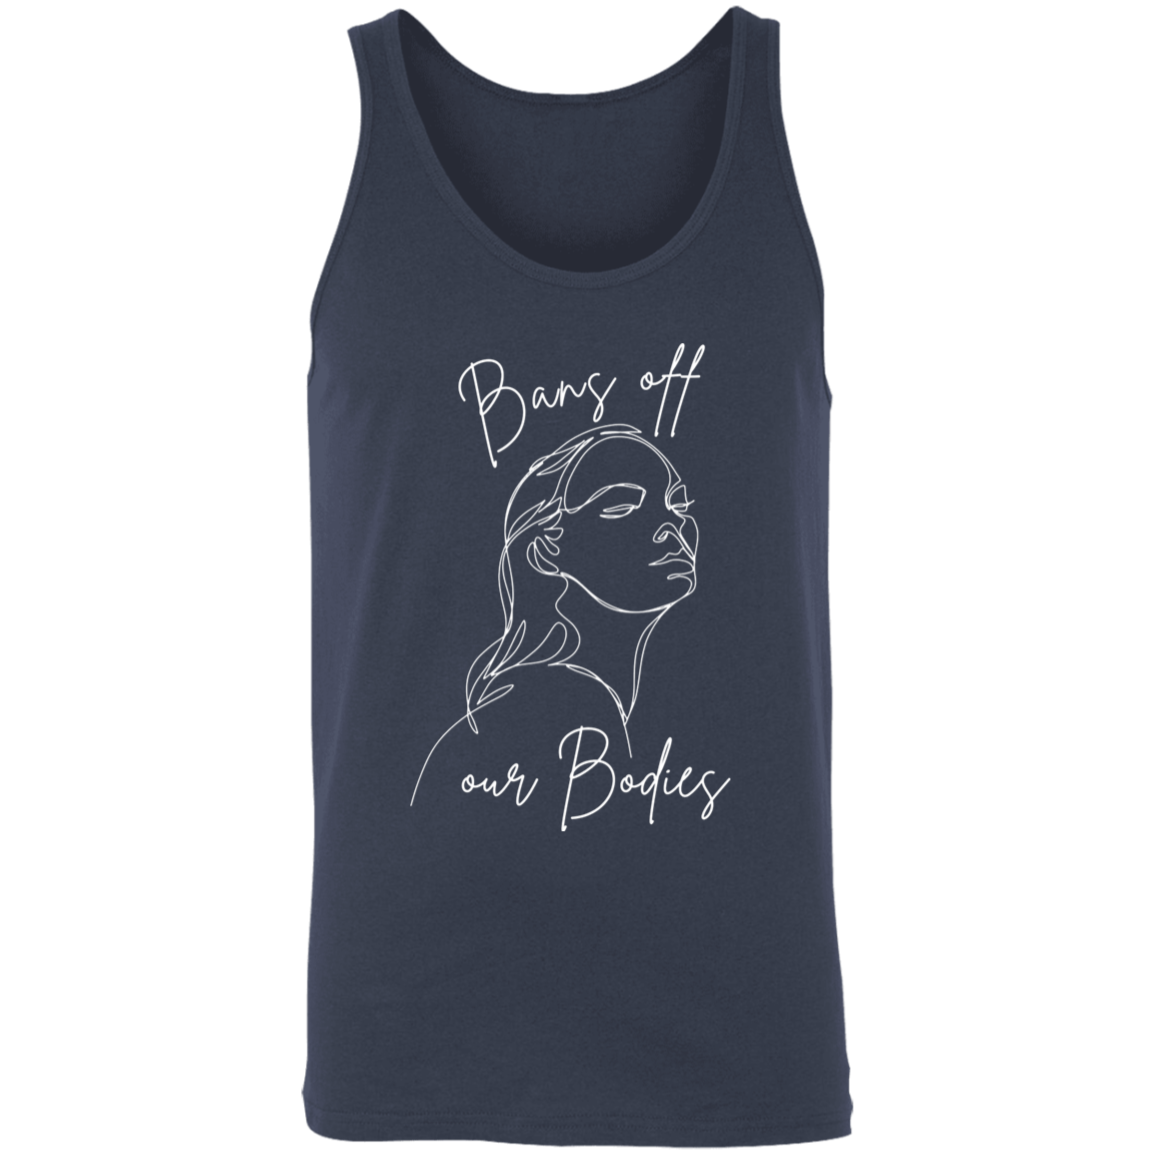 Off Our Bodies Tank - Unisex